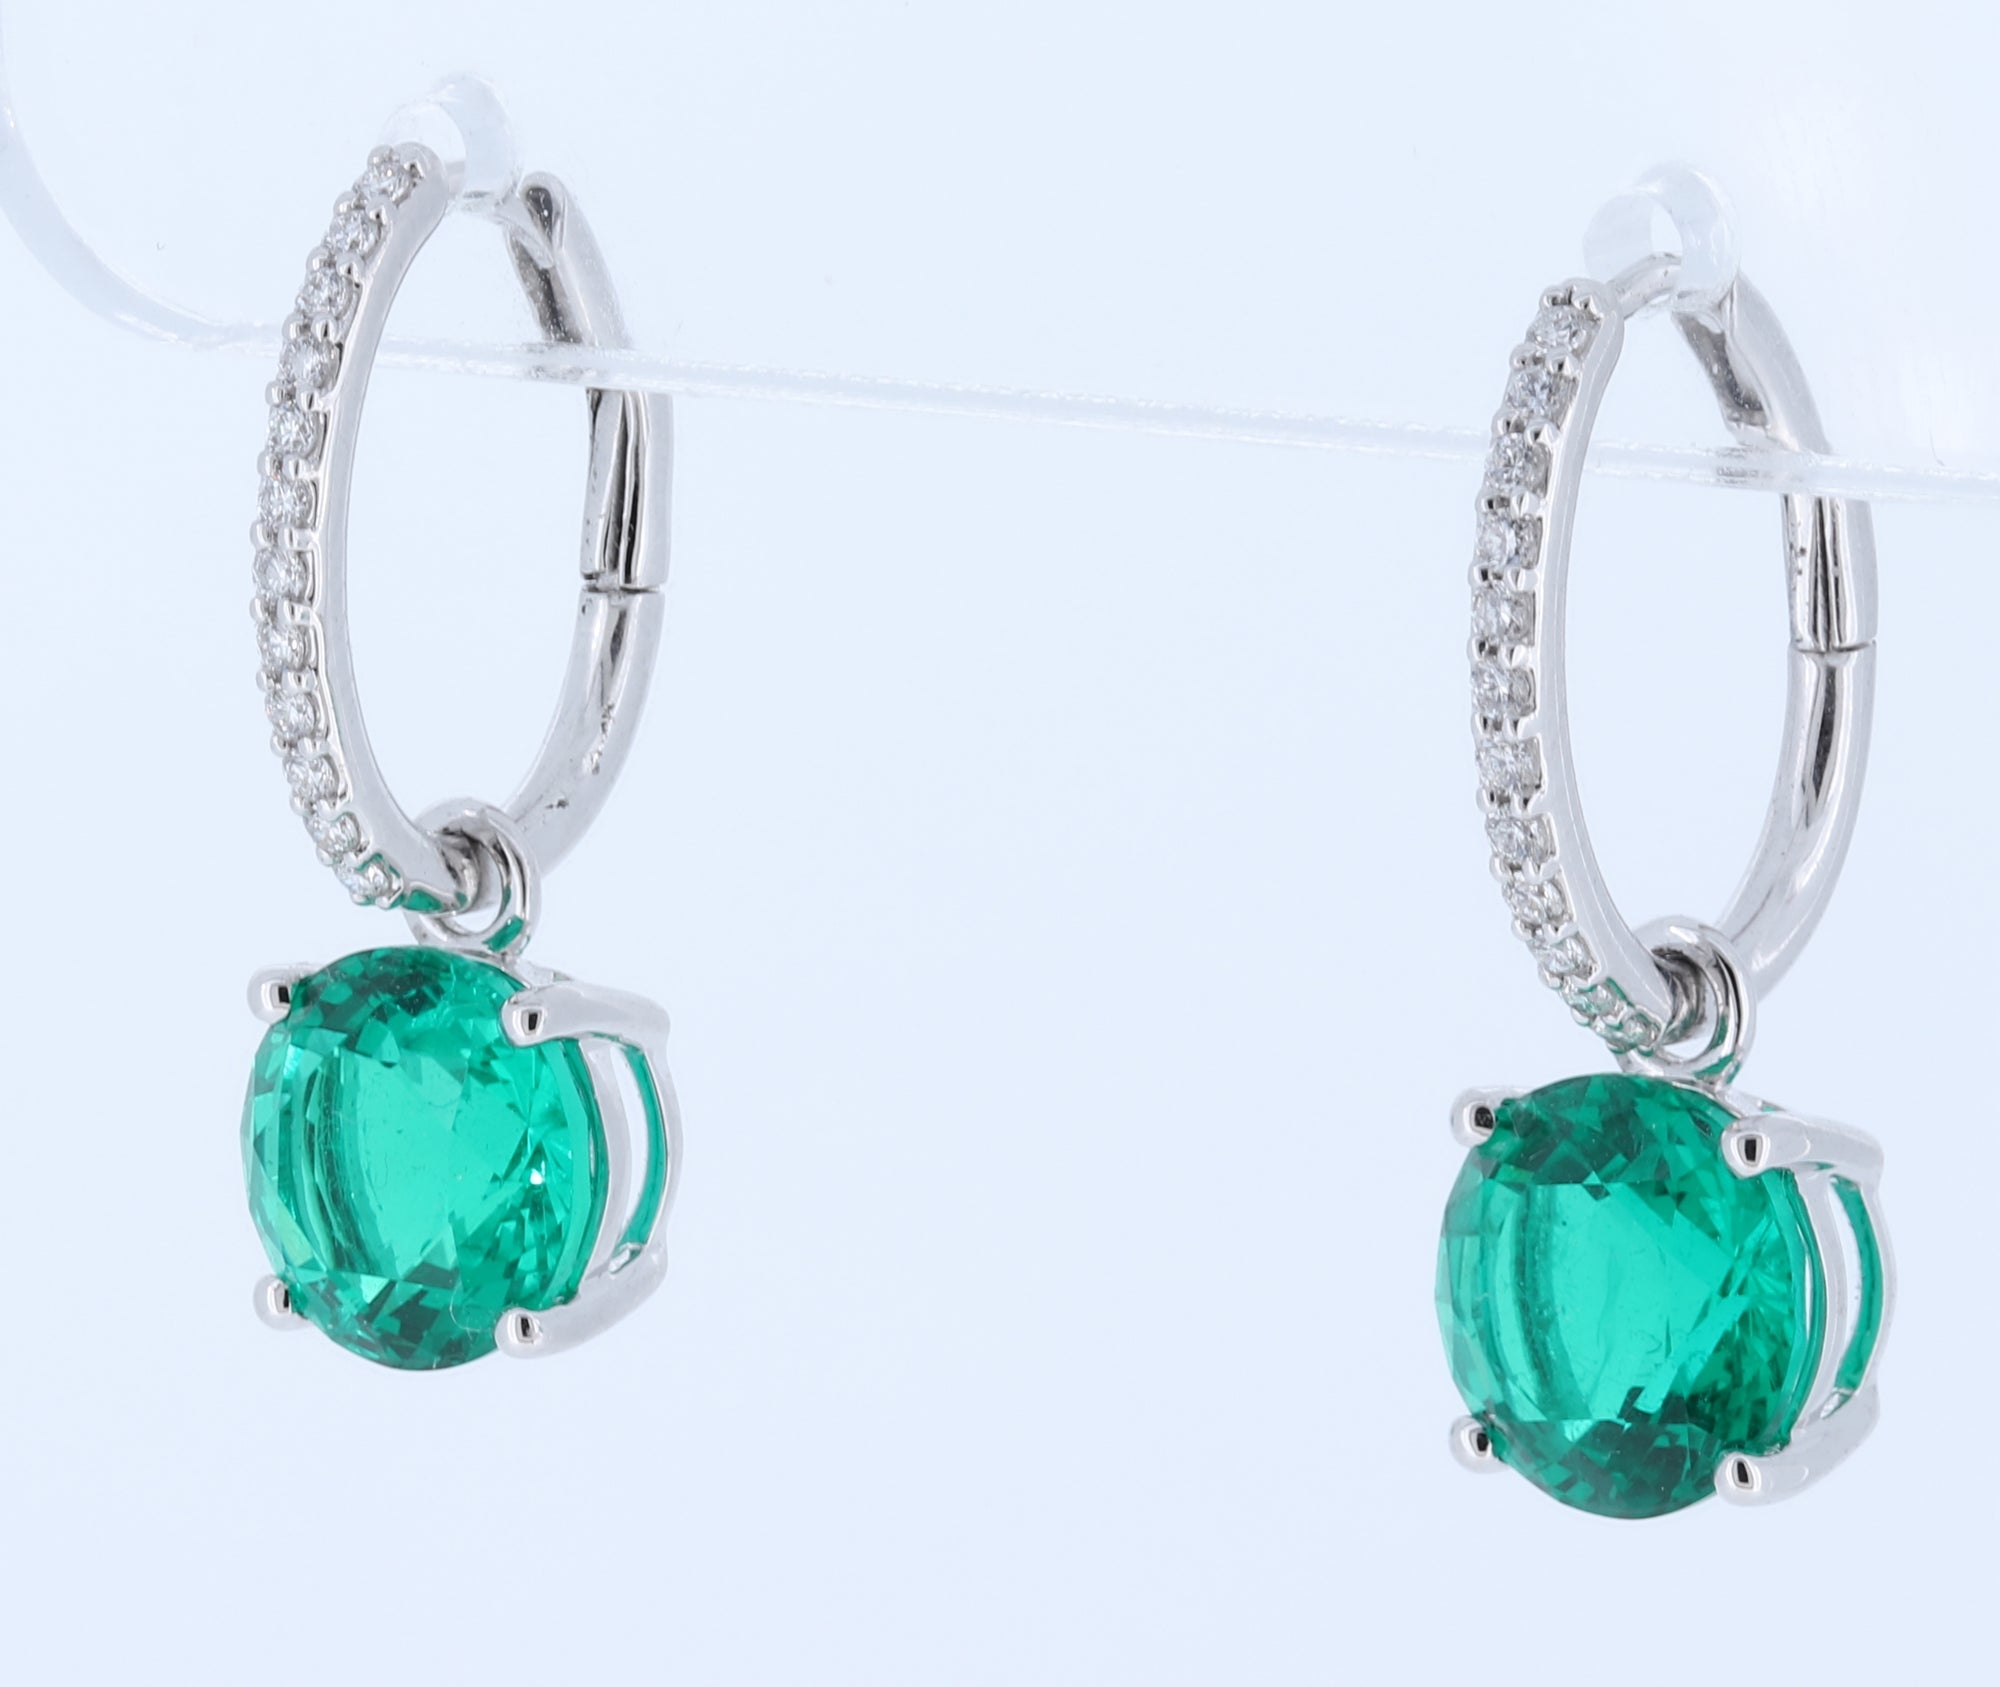 14Kt White Gold J'Adore Simulated Emerald Drop Earrings With Natural Diamonds In 14Kt White Gold